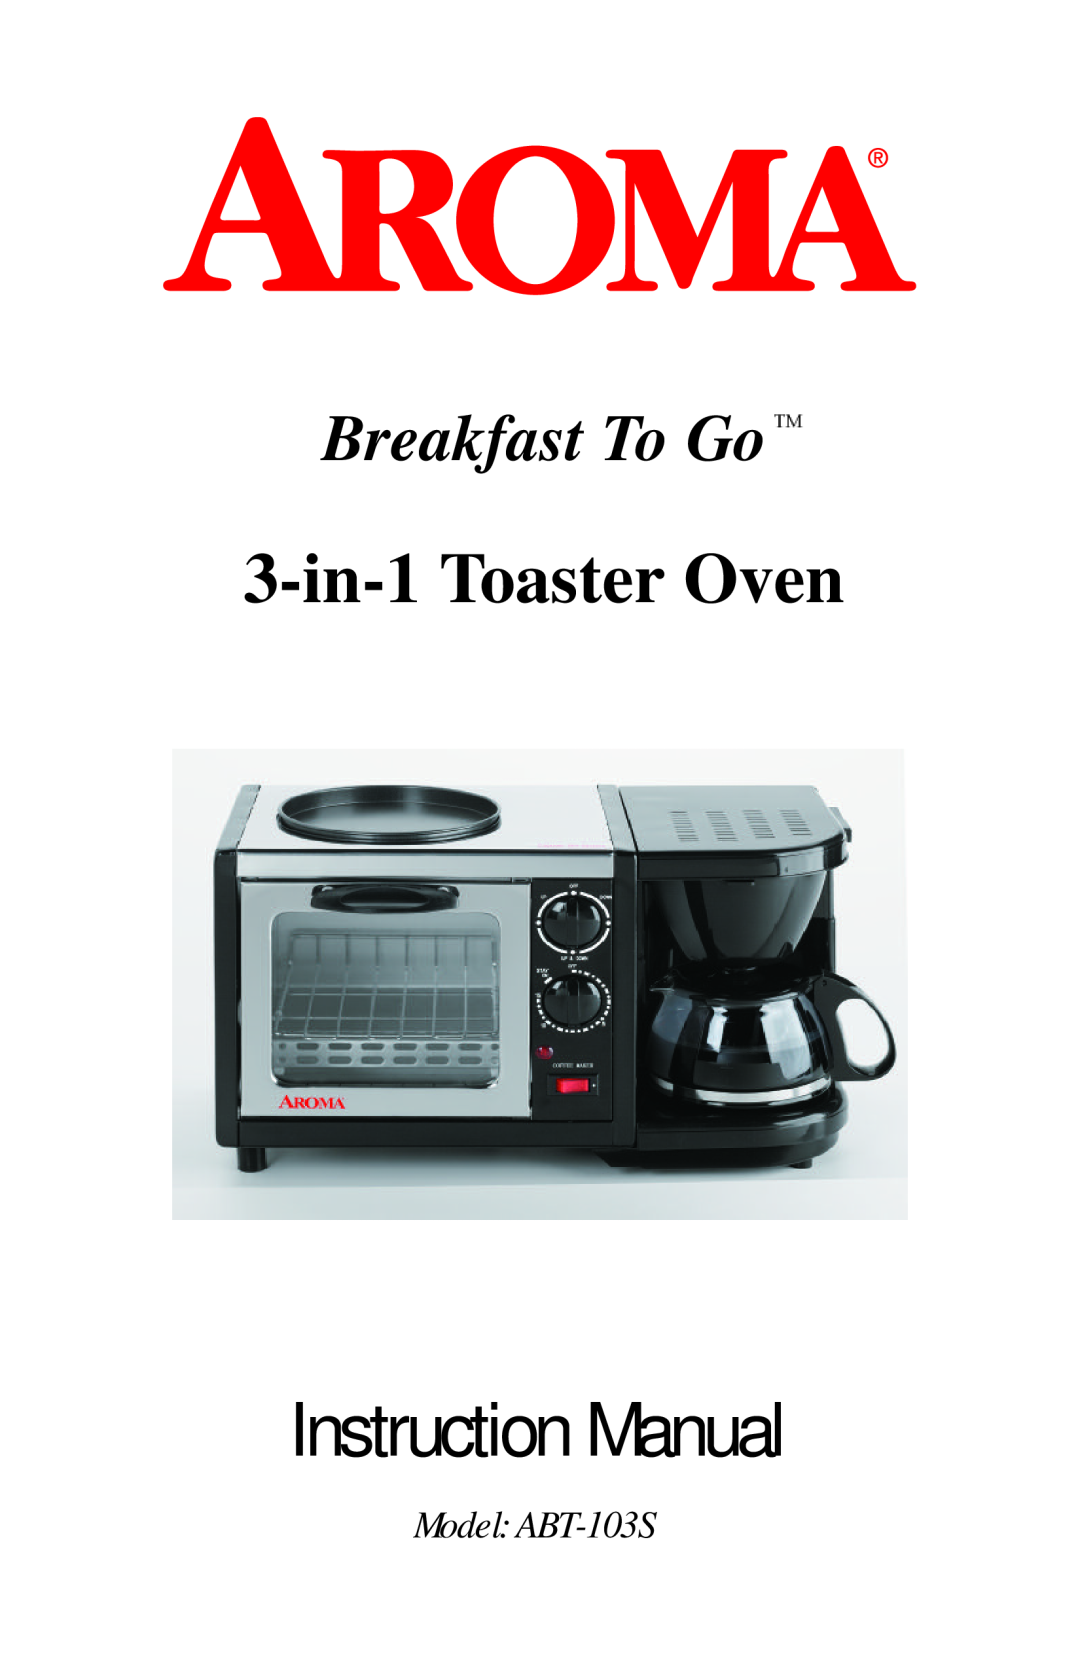 Aroma instruction manual 3-in-1Toaster Oven, Breakfast To Go, Model ABT-103S 